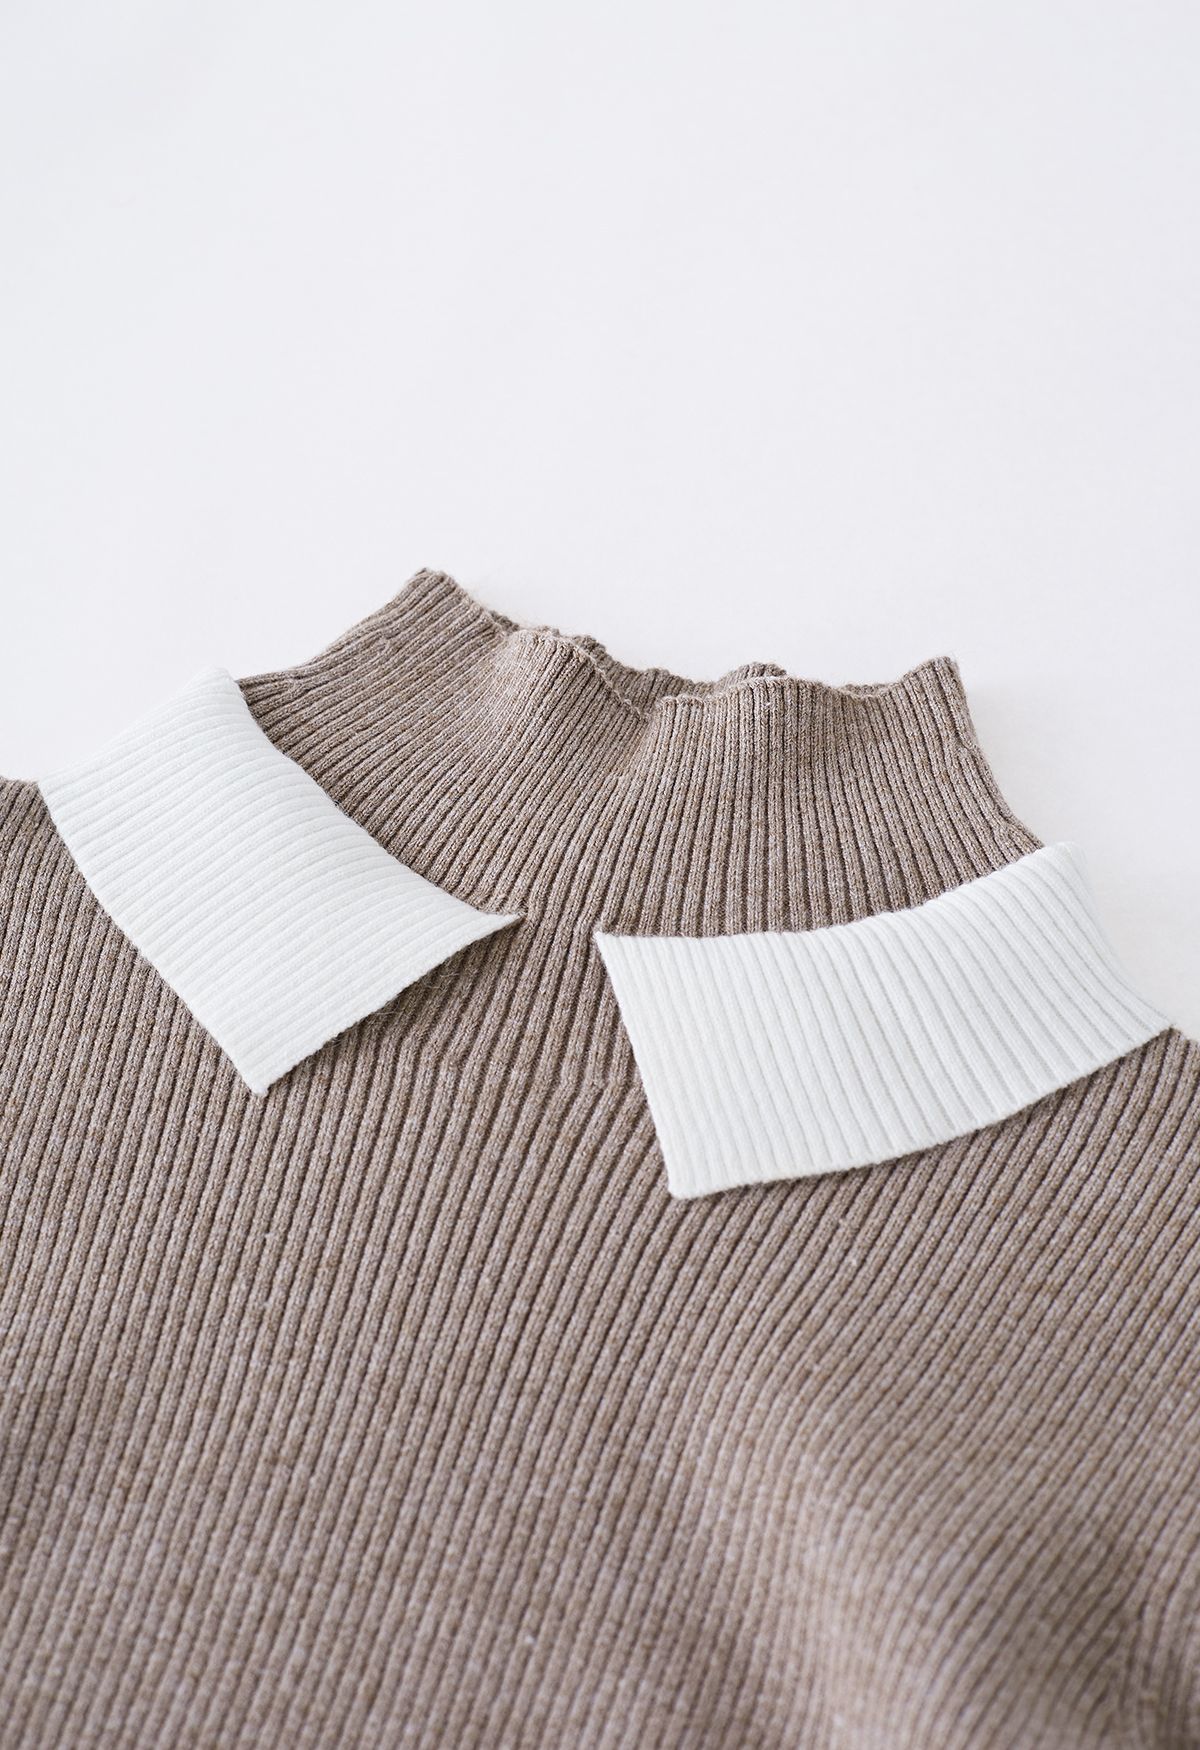 Contrast Doll Collar Mock Neck Knit Top in Taupe